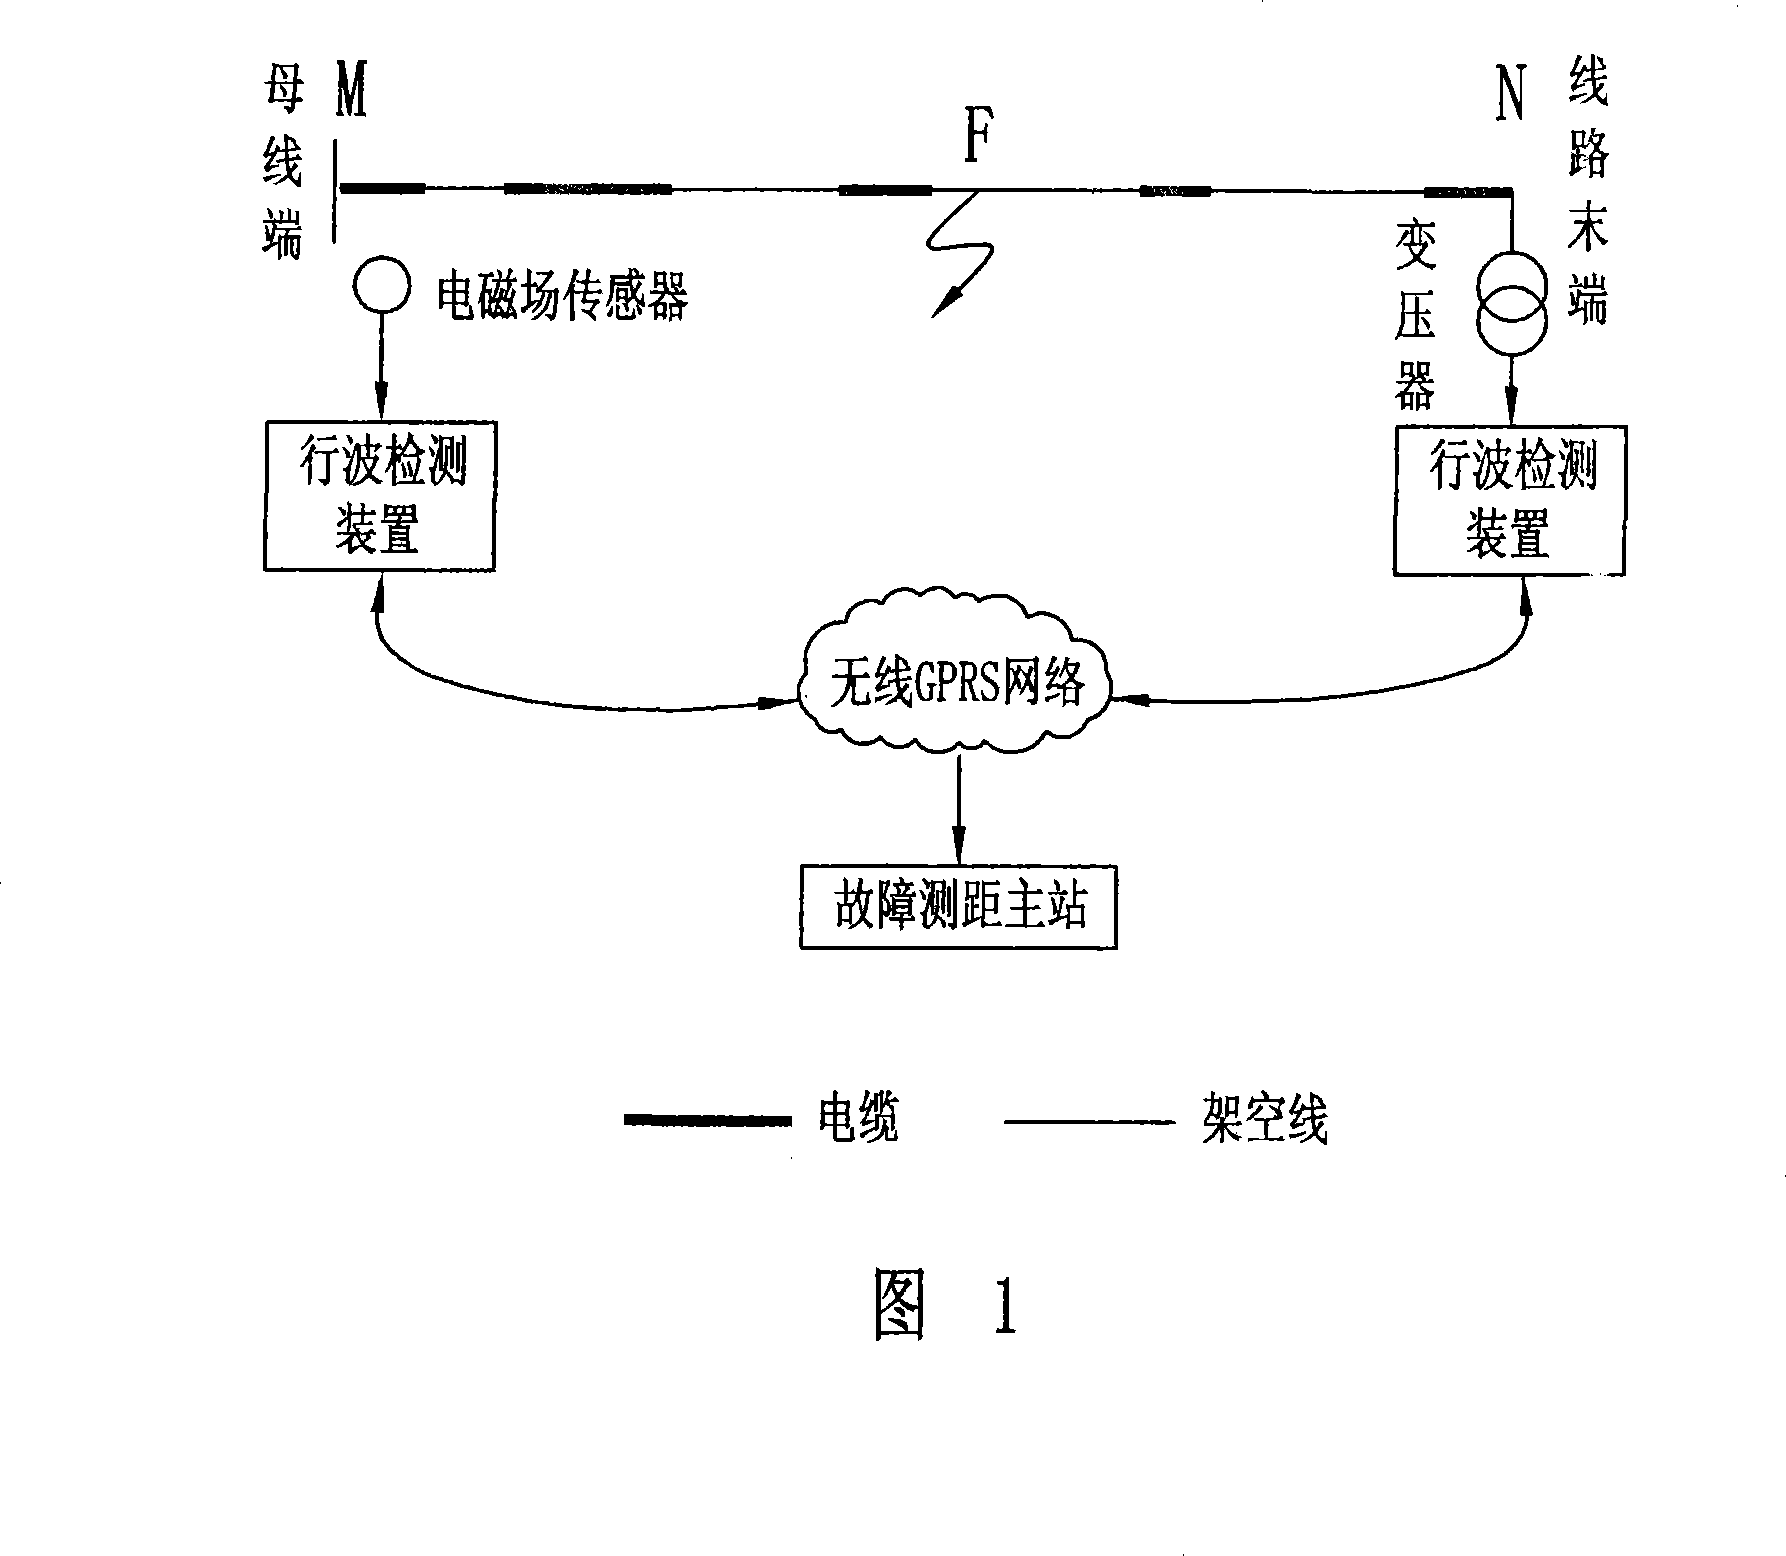 Non-effective earthing distribution system fault locating method based on neutral point of transient traveling wave